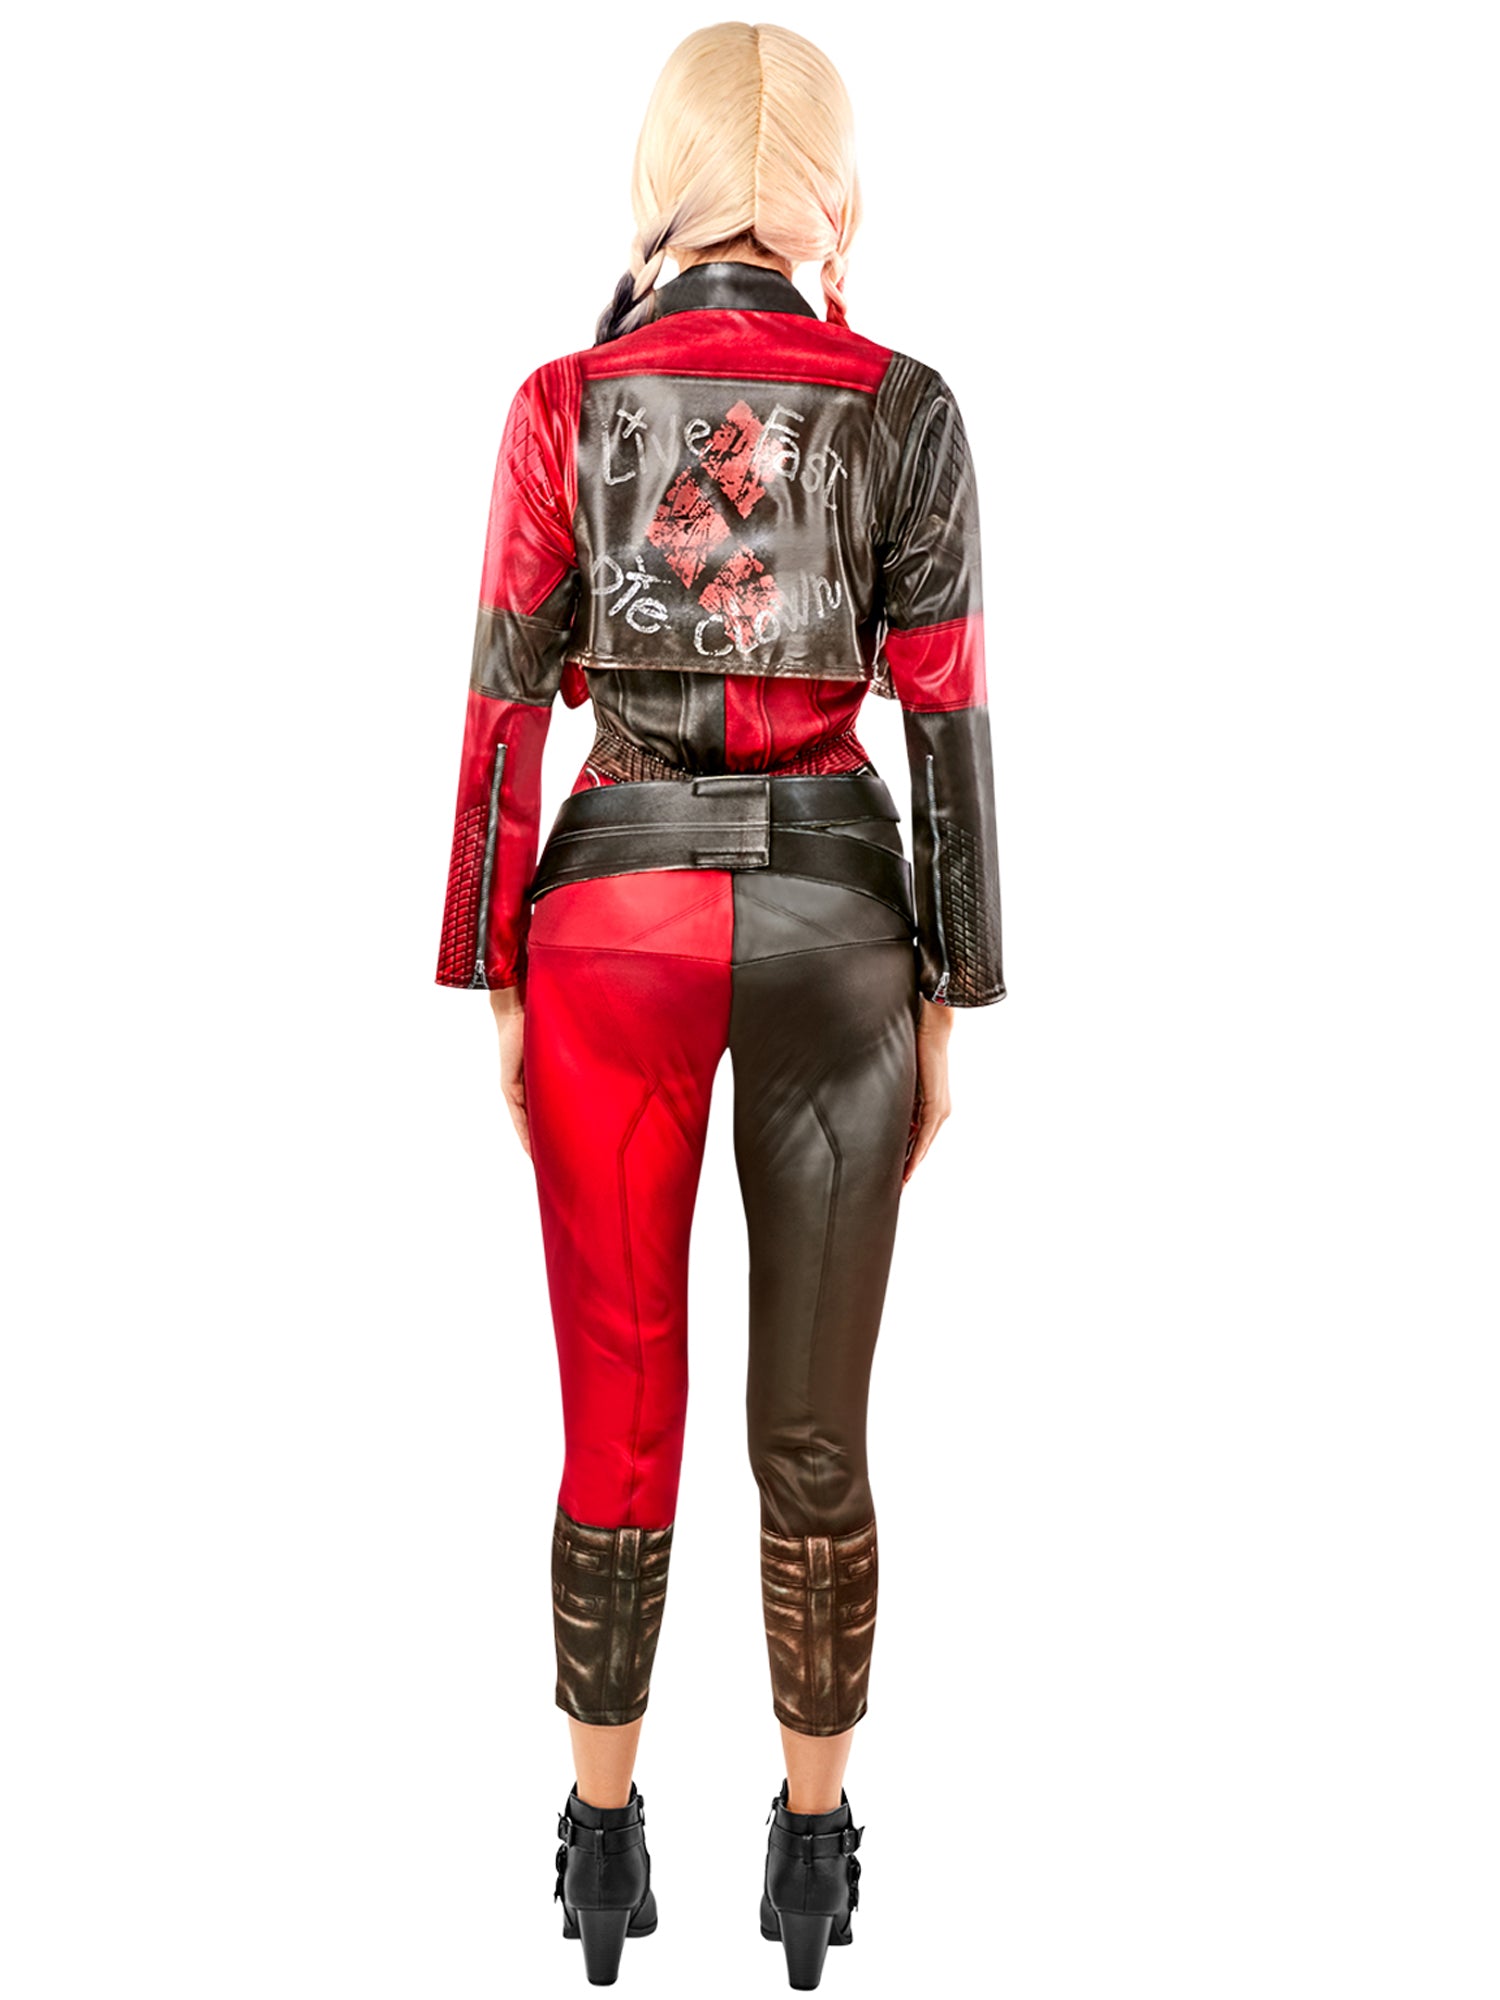 Harley Quinn, Suicide Squad 2, Suicide Squad, Suicide Squad 2, Multi, DC, Adult Costume, Extra Small, Back